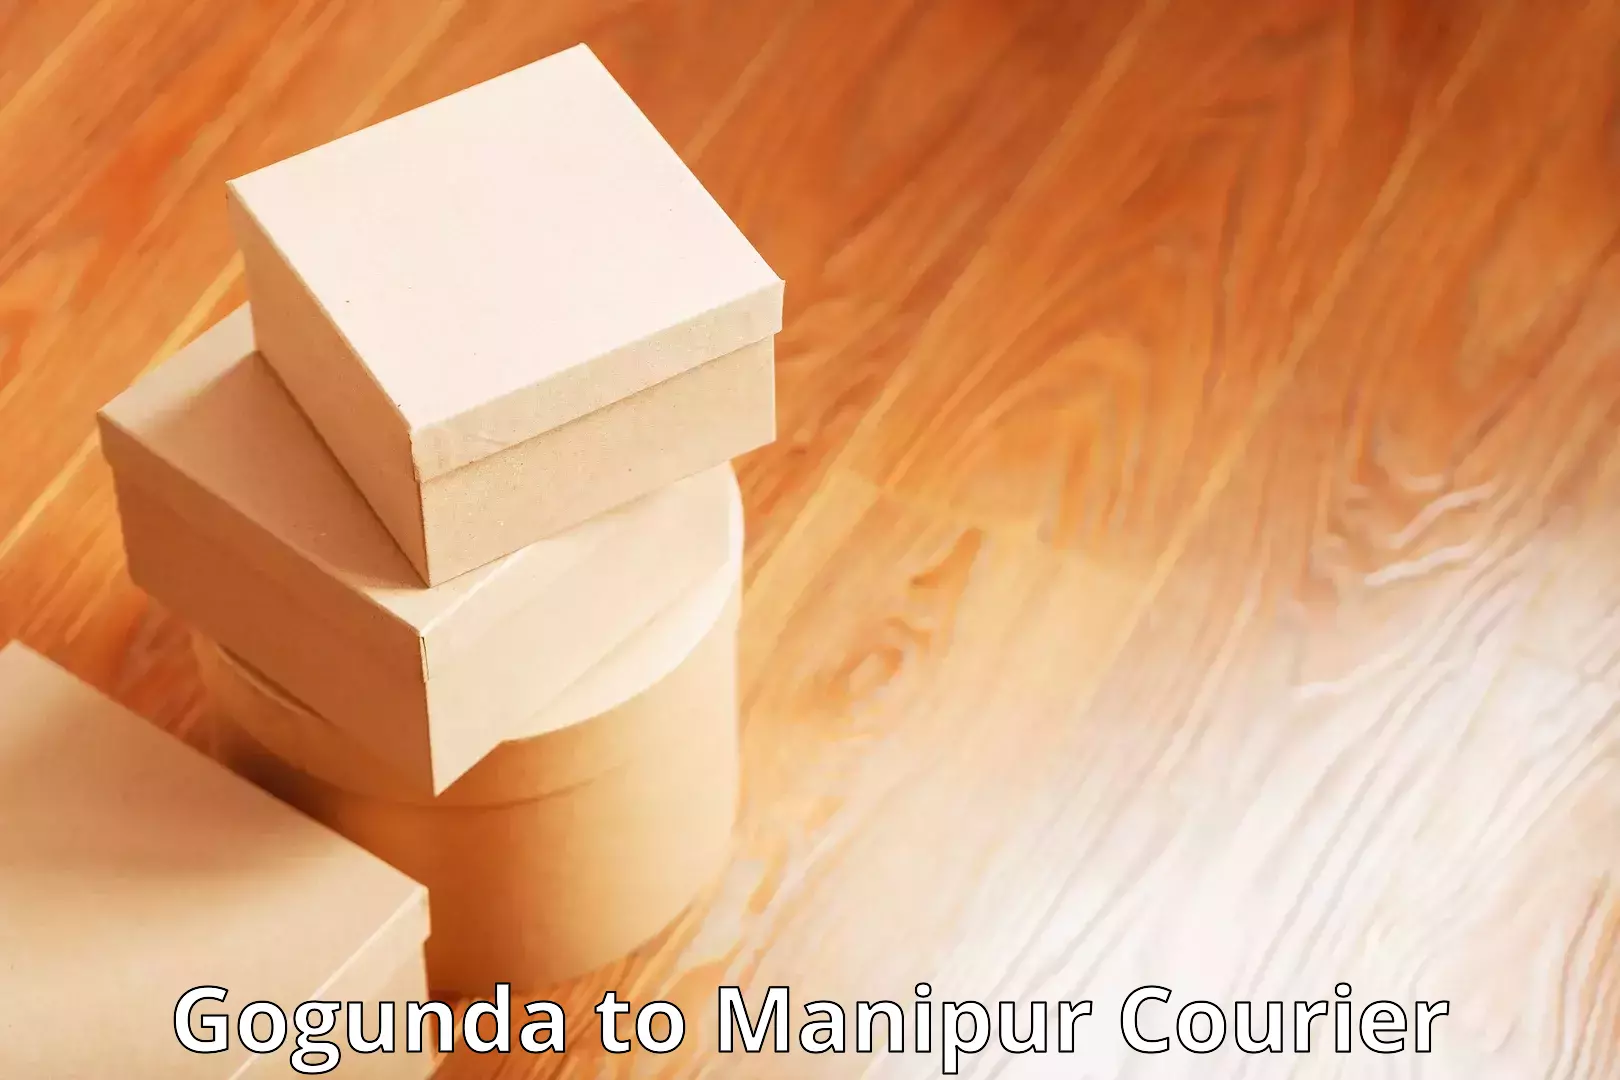 Cash on delivery service Gogunda to Manipur